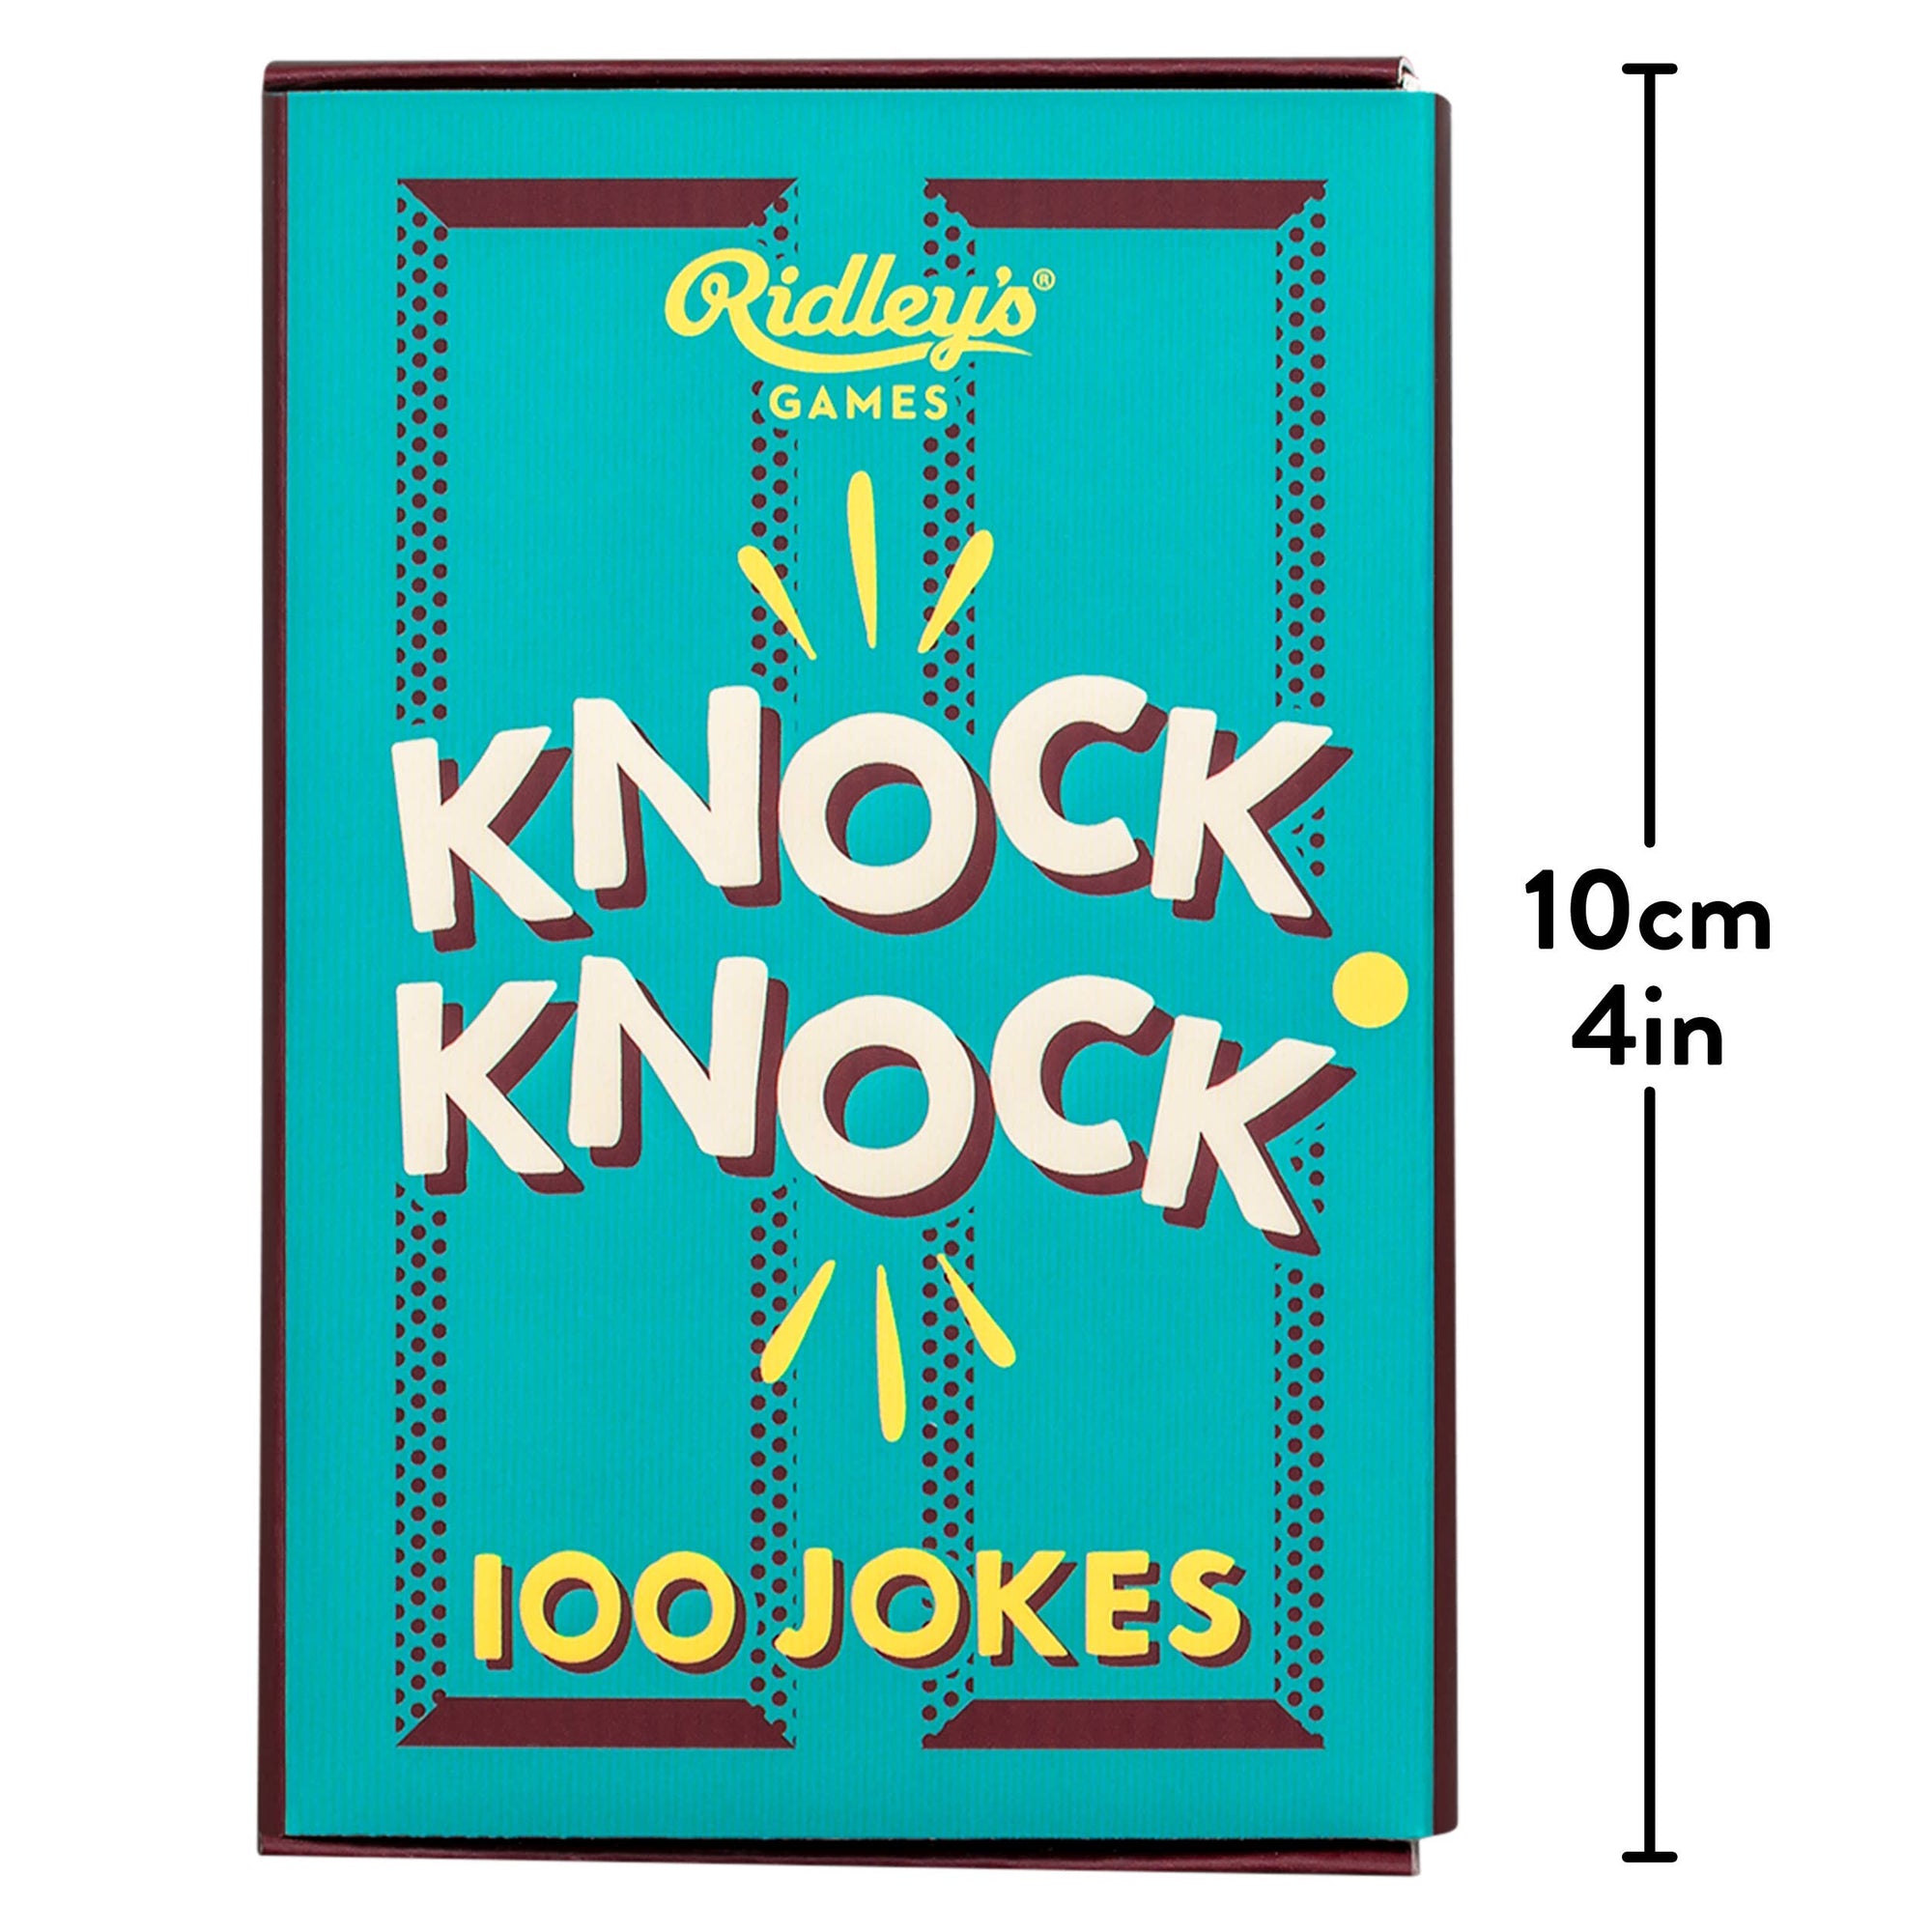 A box of 100 Knock Knock Jokes featuring a card game for kids packed with hilarious jokes.